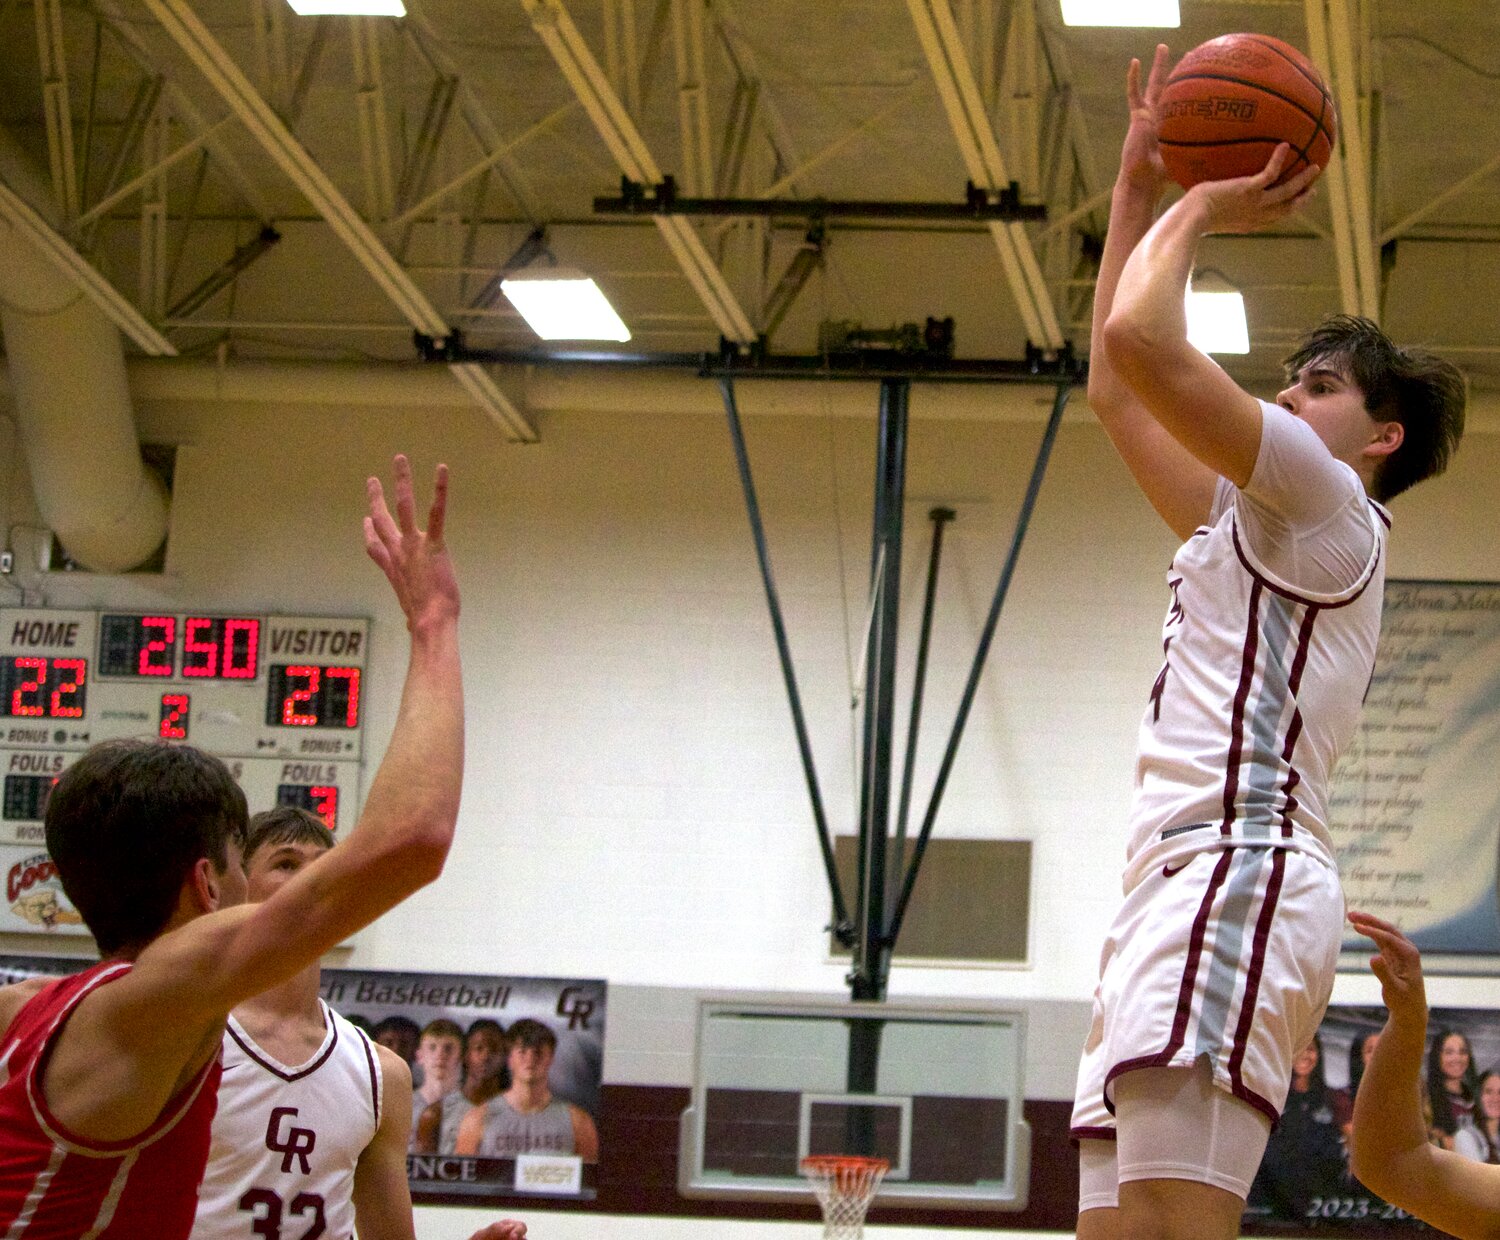 Noah Pearce shoots a jumper during Wednesday’s game between Katy and Cinco Ranch at the Cinco Ranch gym.